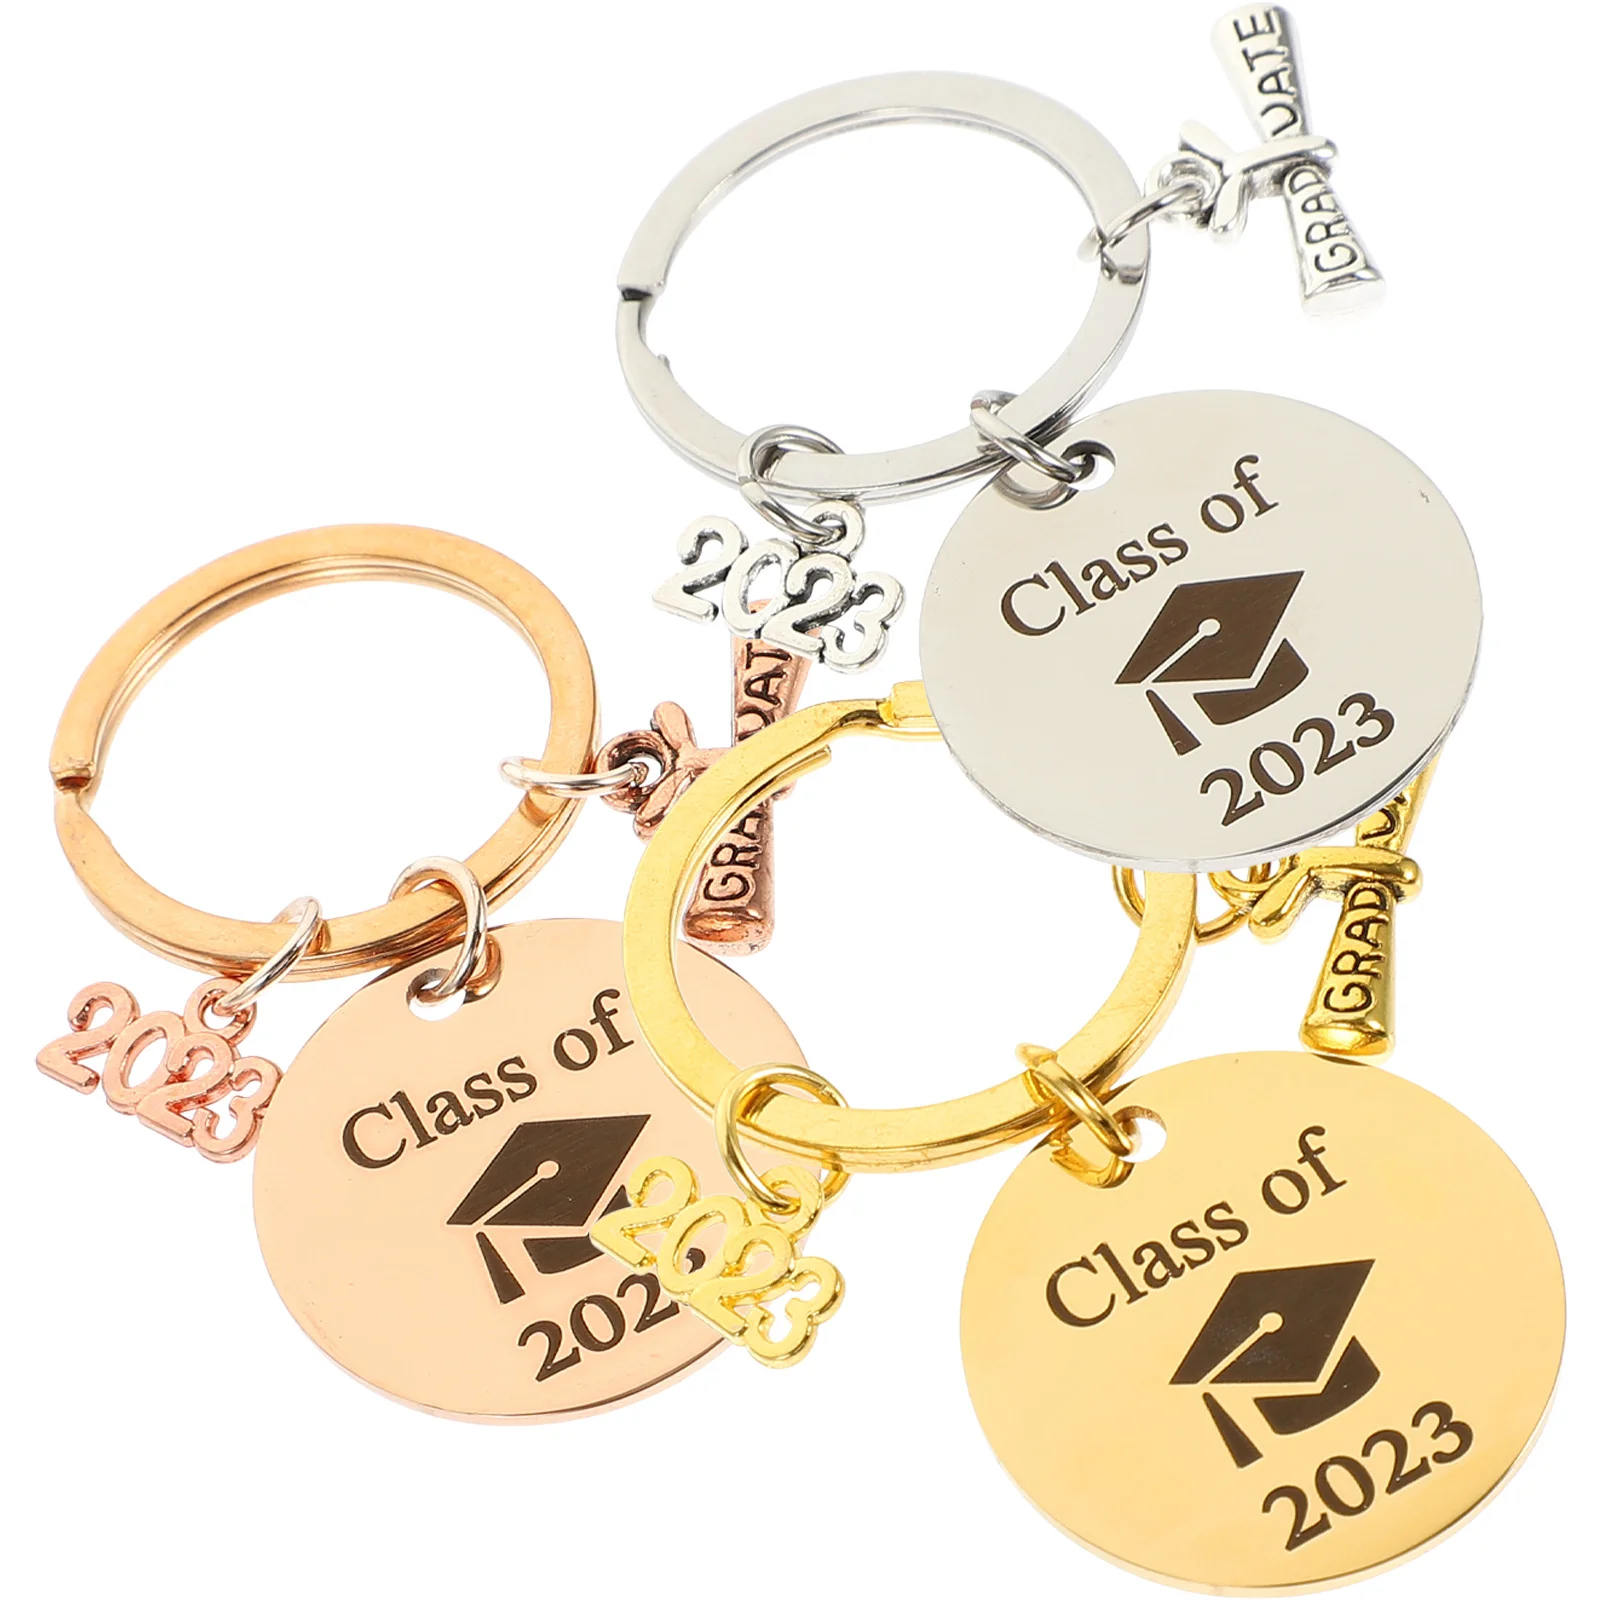 

Graduation Gift Keychain Key Pendant Favor Keyring Grad Party Jewelry Themed Year Charm Metal Creative Keychains Ring